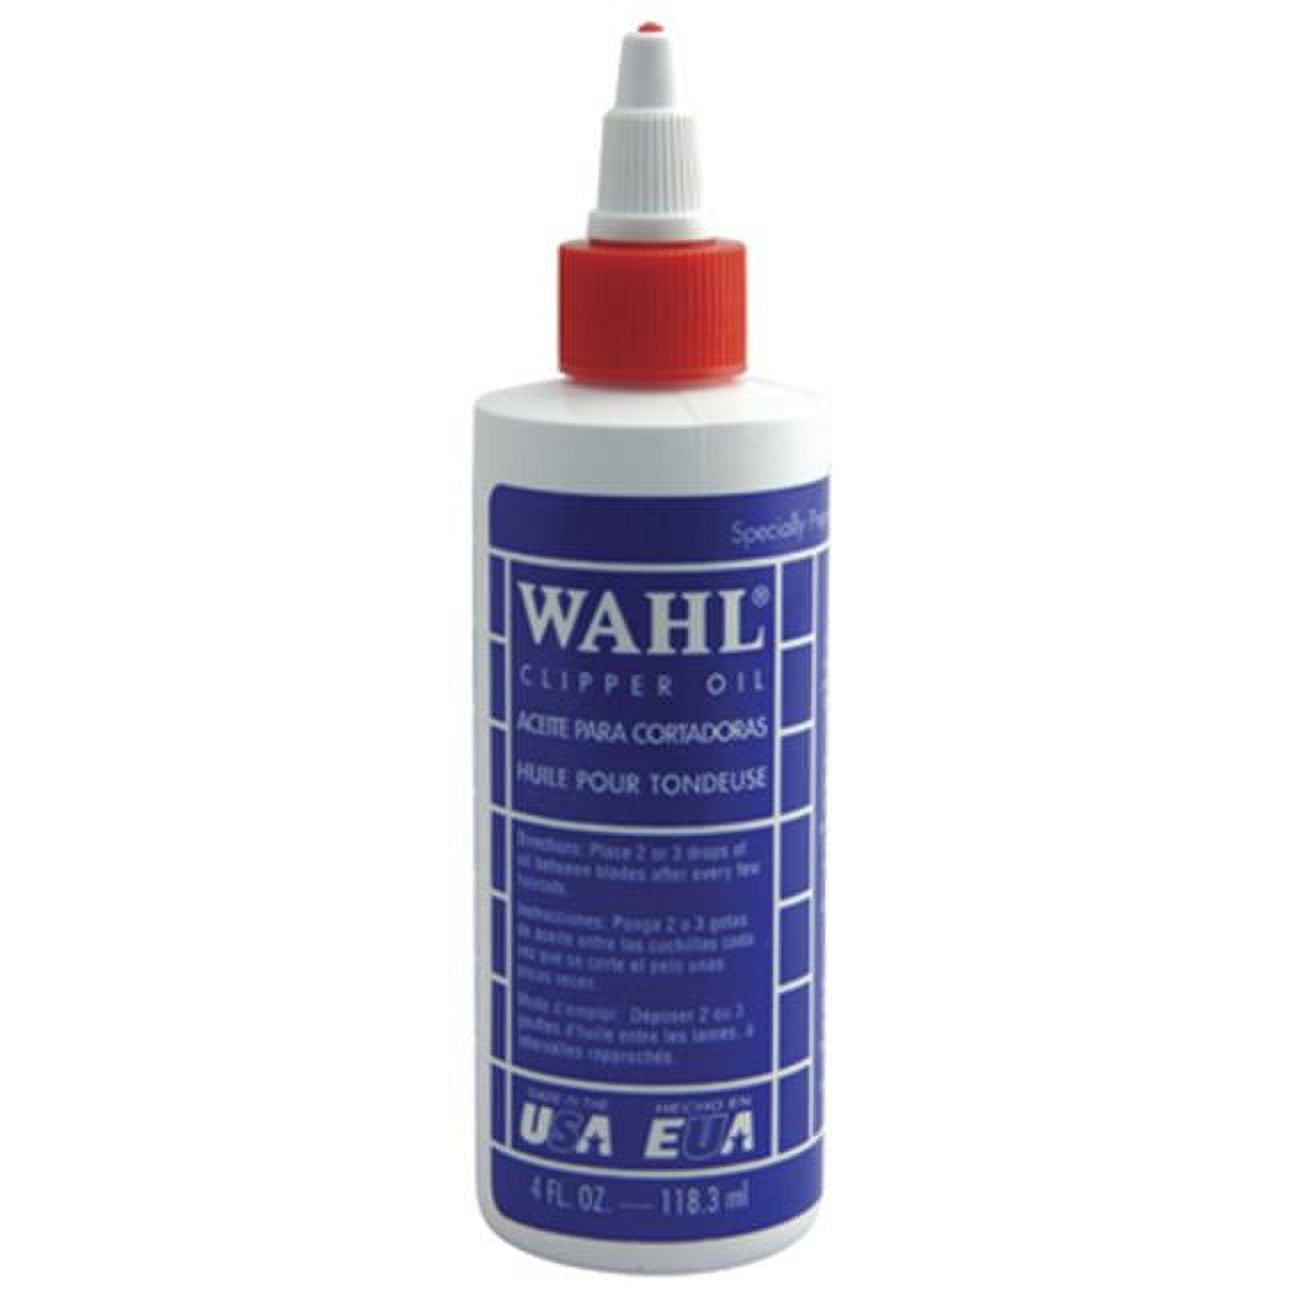 Wahl Premium Hair Clipper Blade Lubricating Oil for Clippers